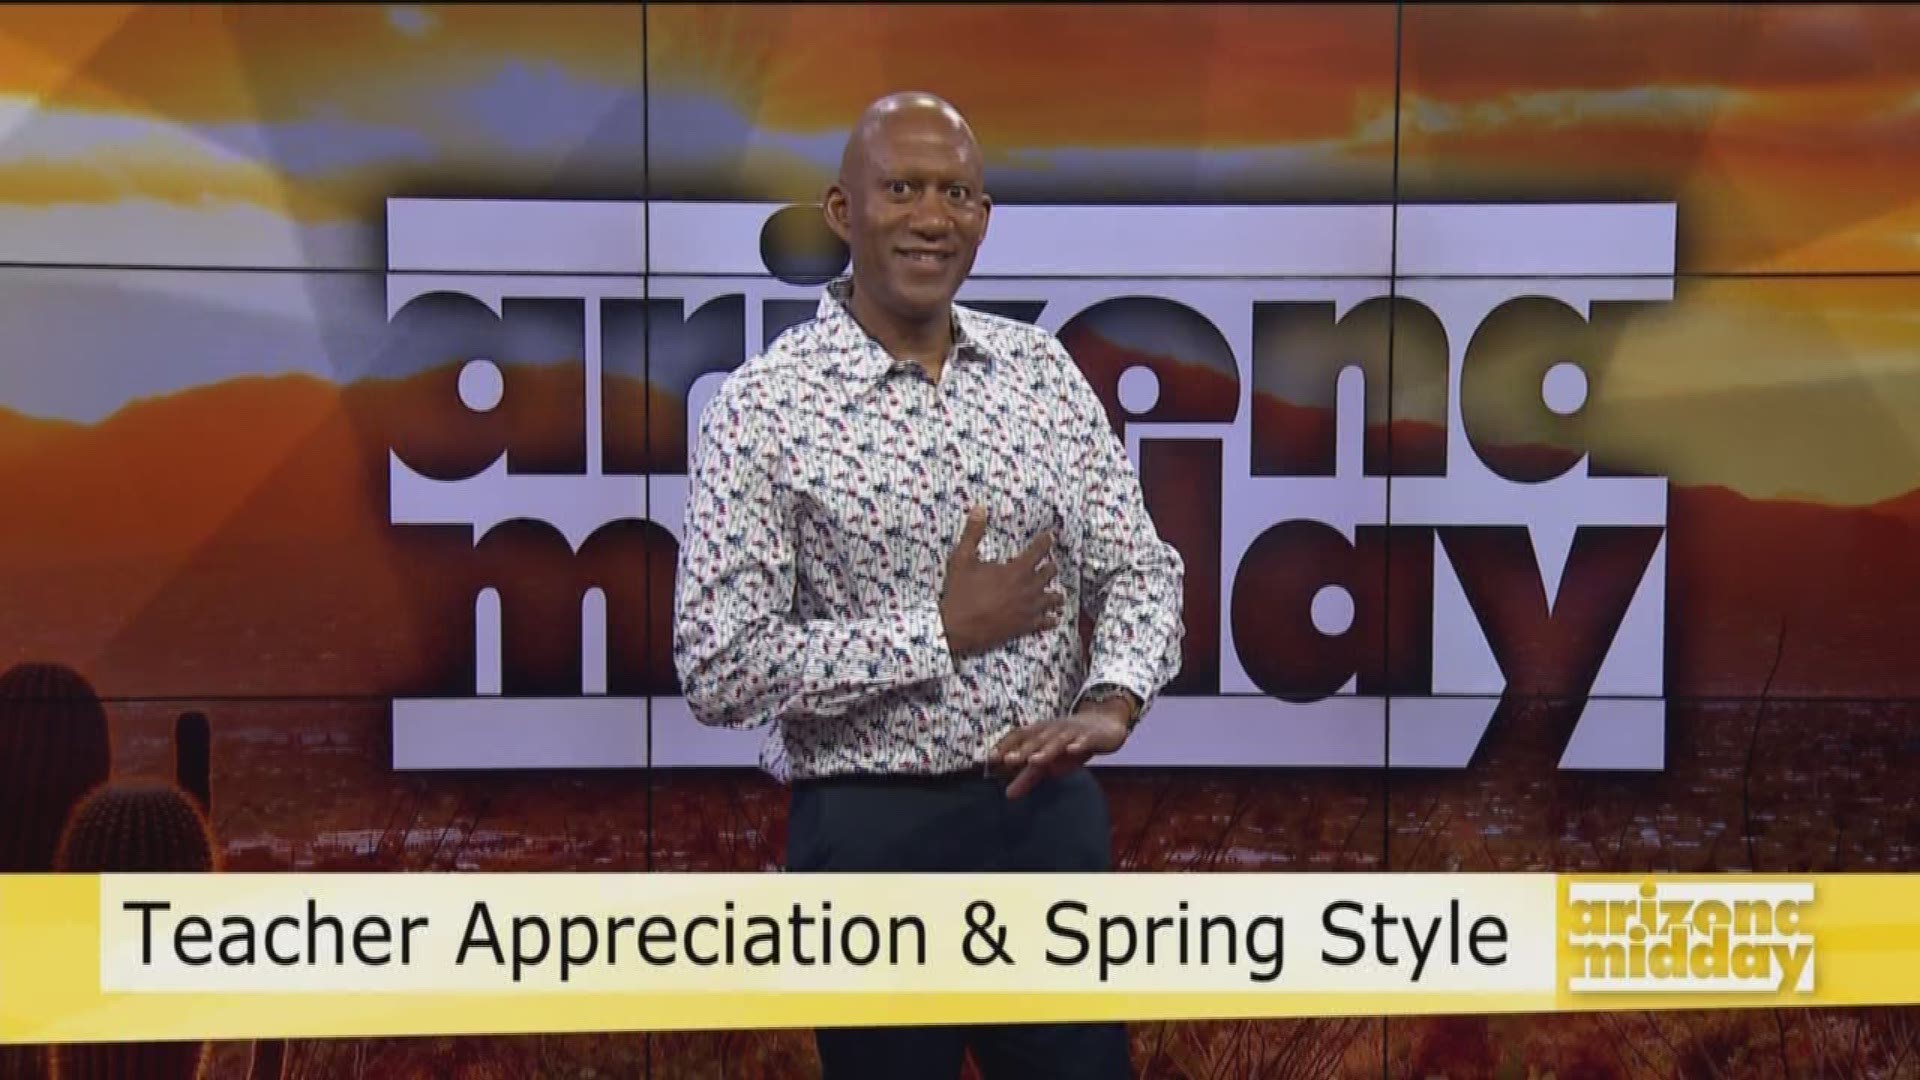 Danielle Nelson With Phoenix Premium Outlets is showing us the latest spring styles in honor of teacher appreciation week